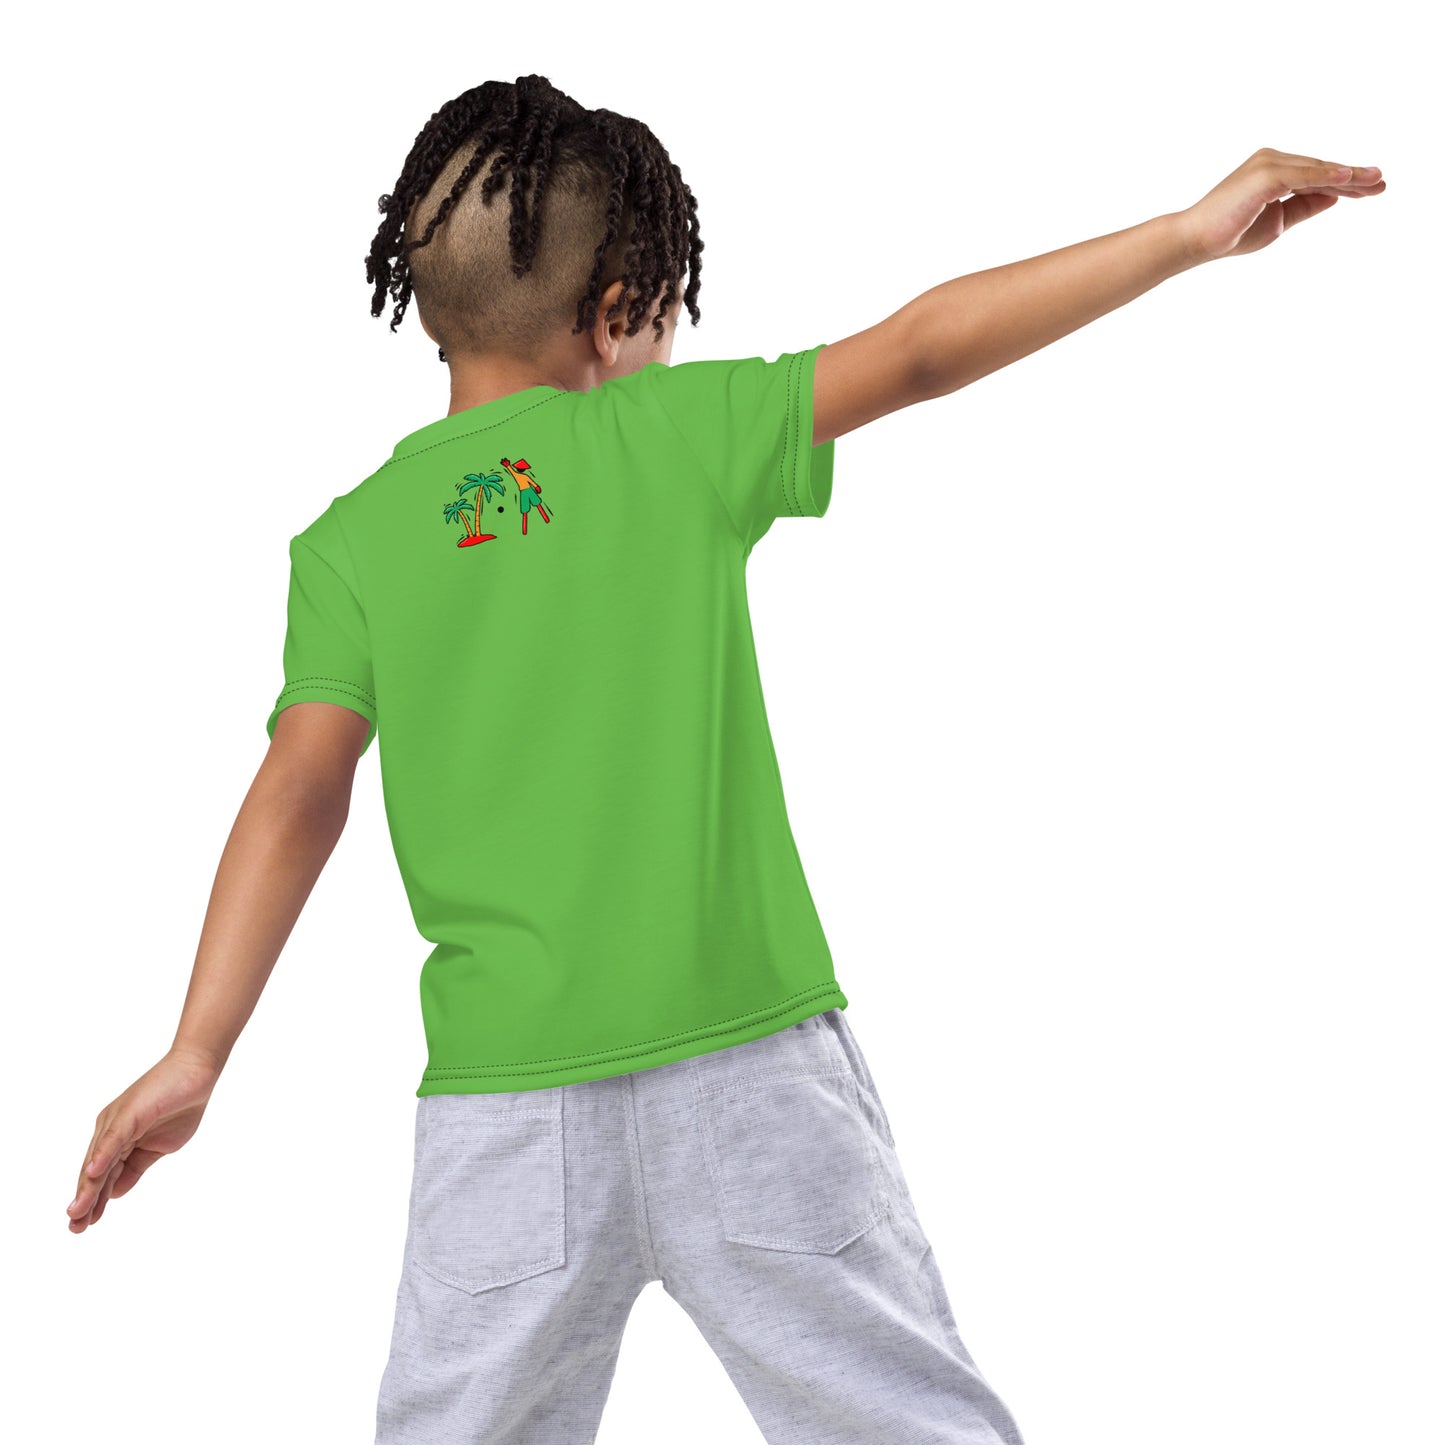 Green V.Localized (Ice/Gold/Green) Dry-Fit Kids  T-Shirt